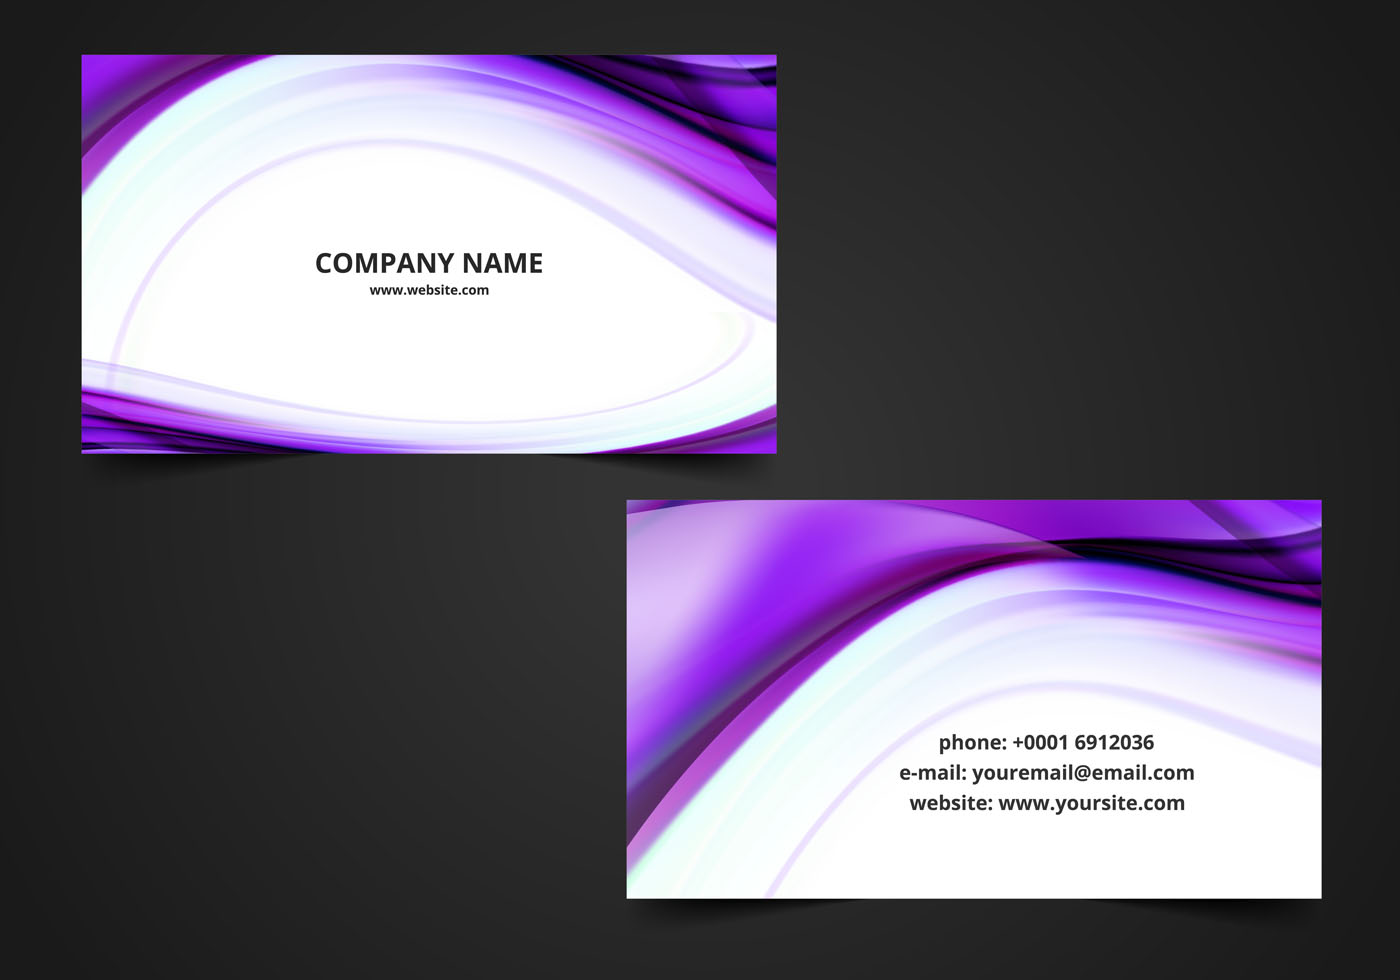 Free Vector Wavy Visiting Card Background - Download Free Vector Art